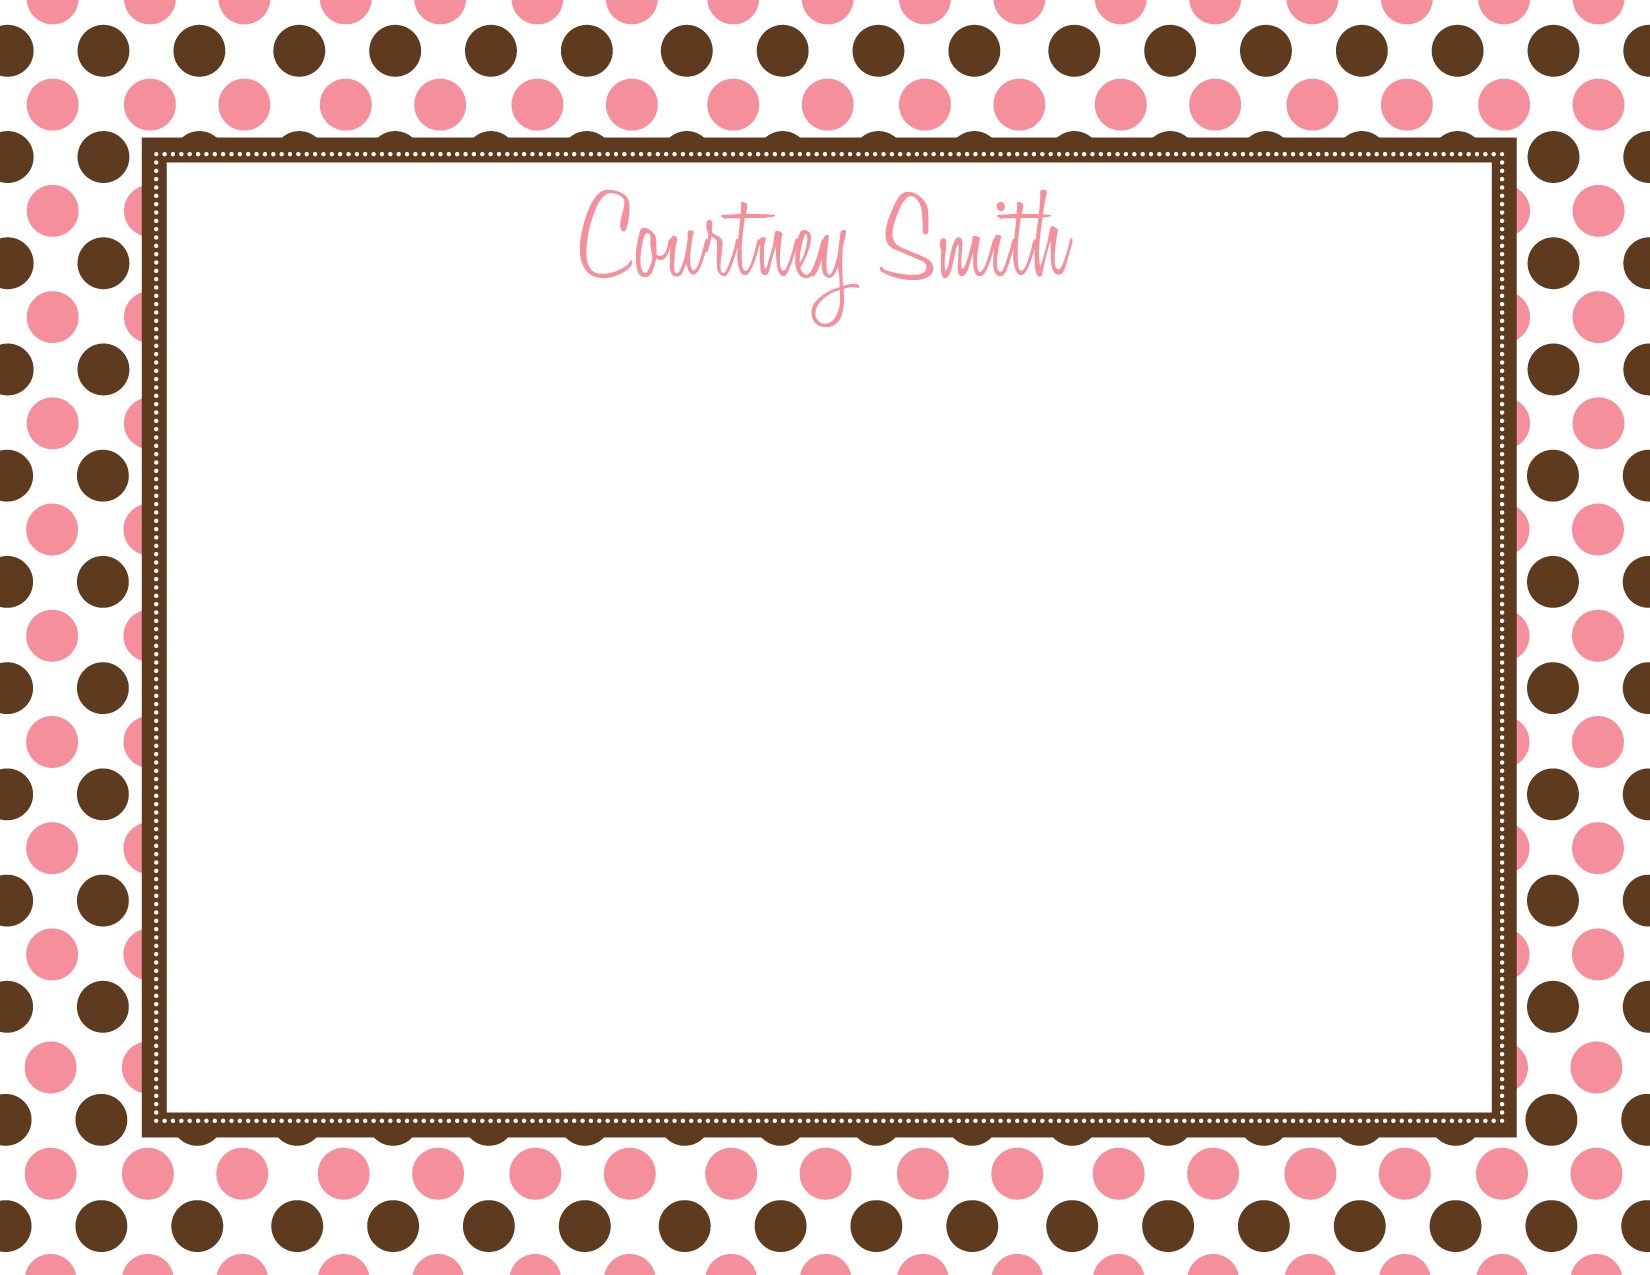 Polka Dot Border Clipart | Free download on ClipArtMag